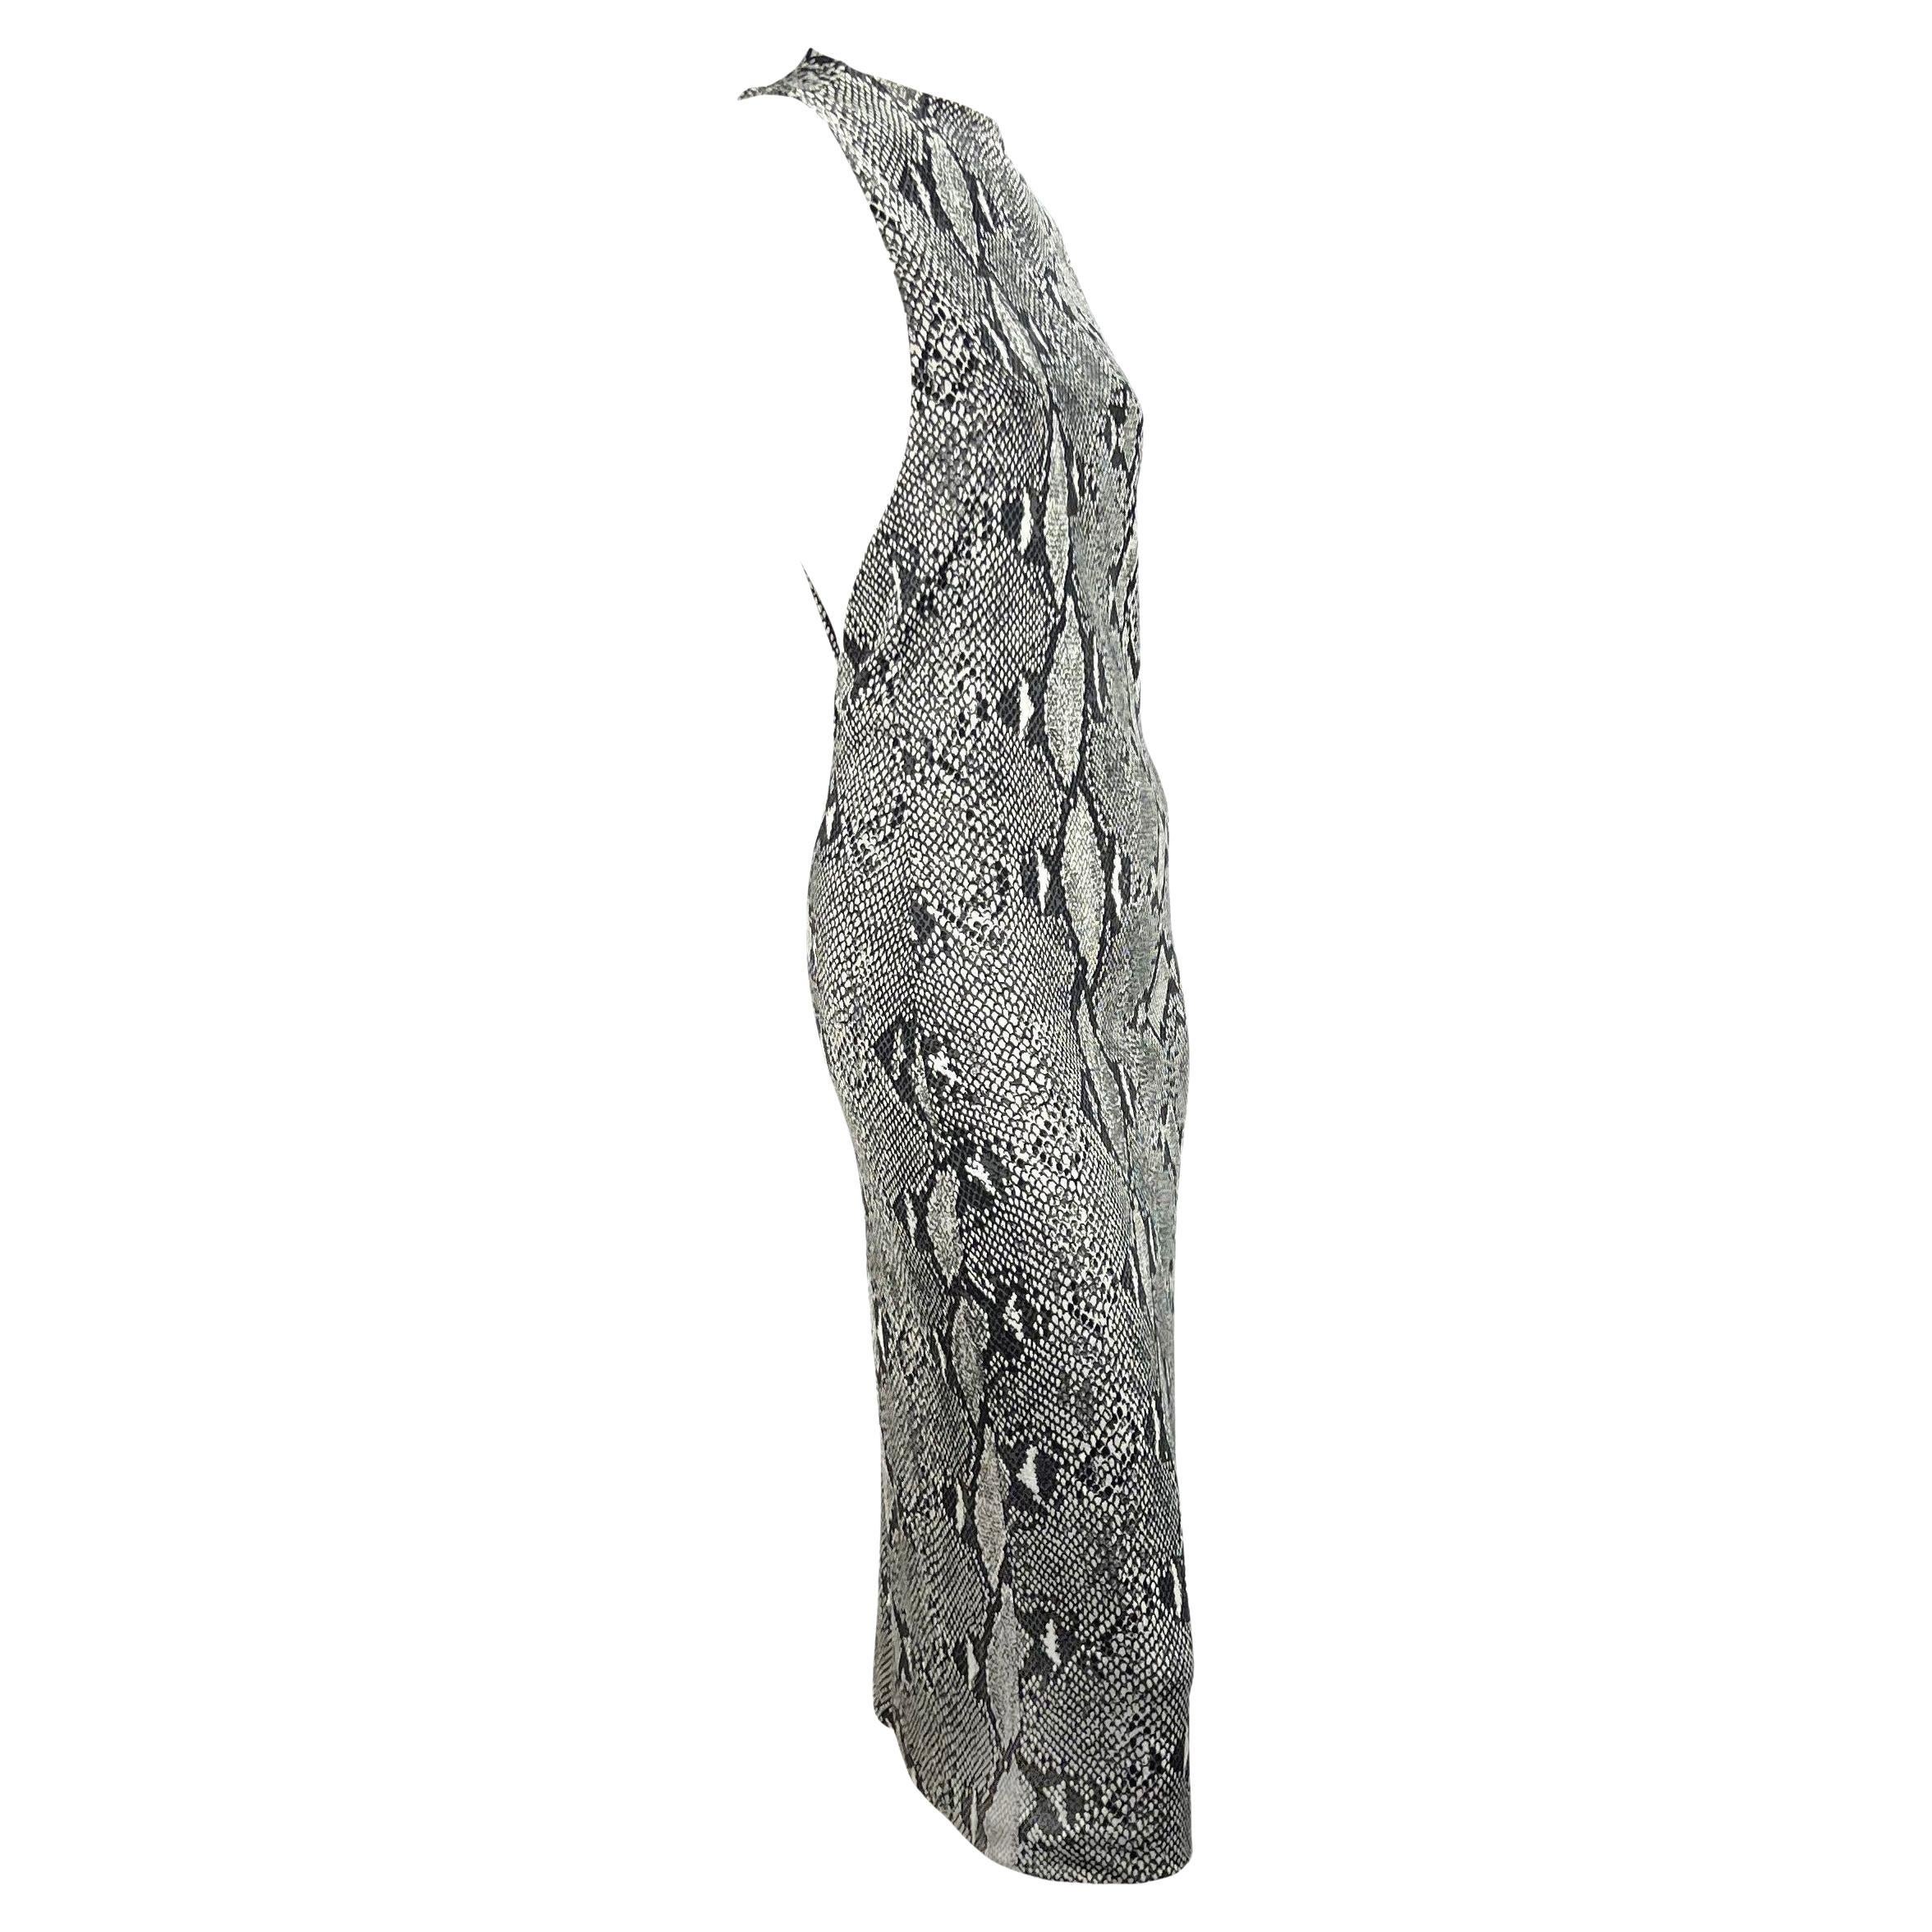 S/S 2000 Gucci by Tom Ford Grey Snake Print Asymmetric One Sleeve Dress For Sale 6